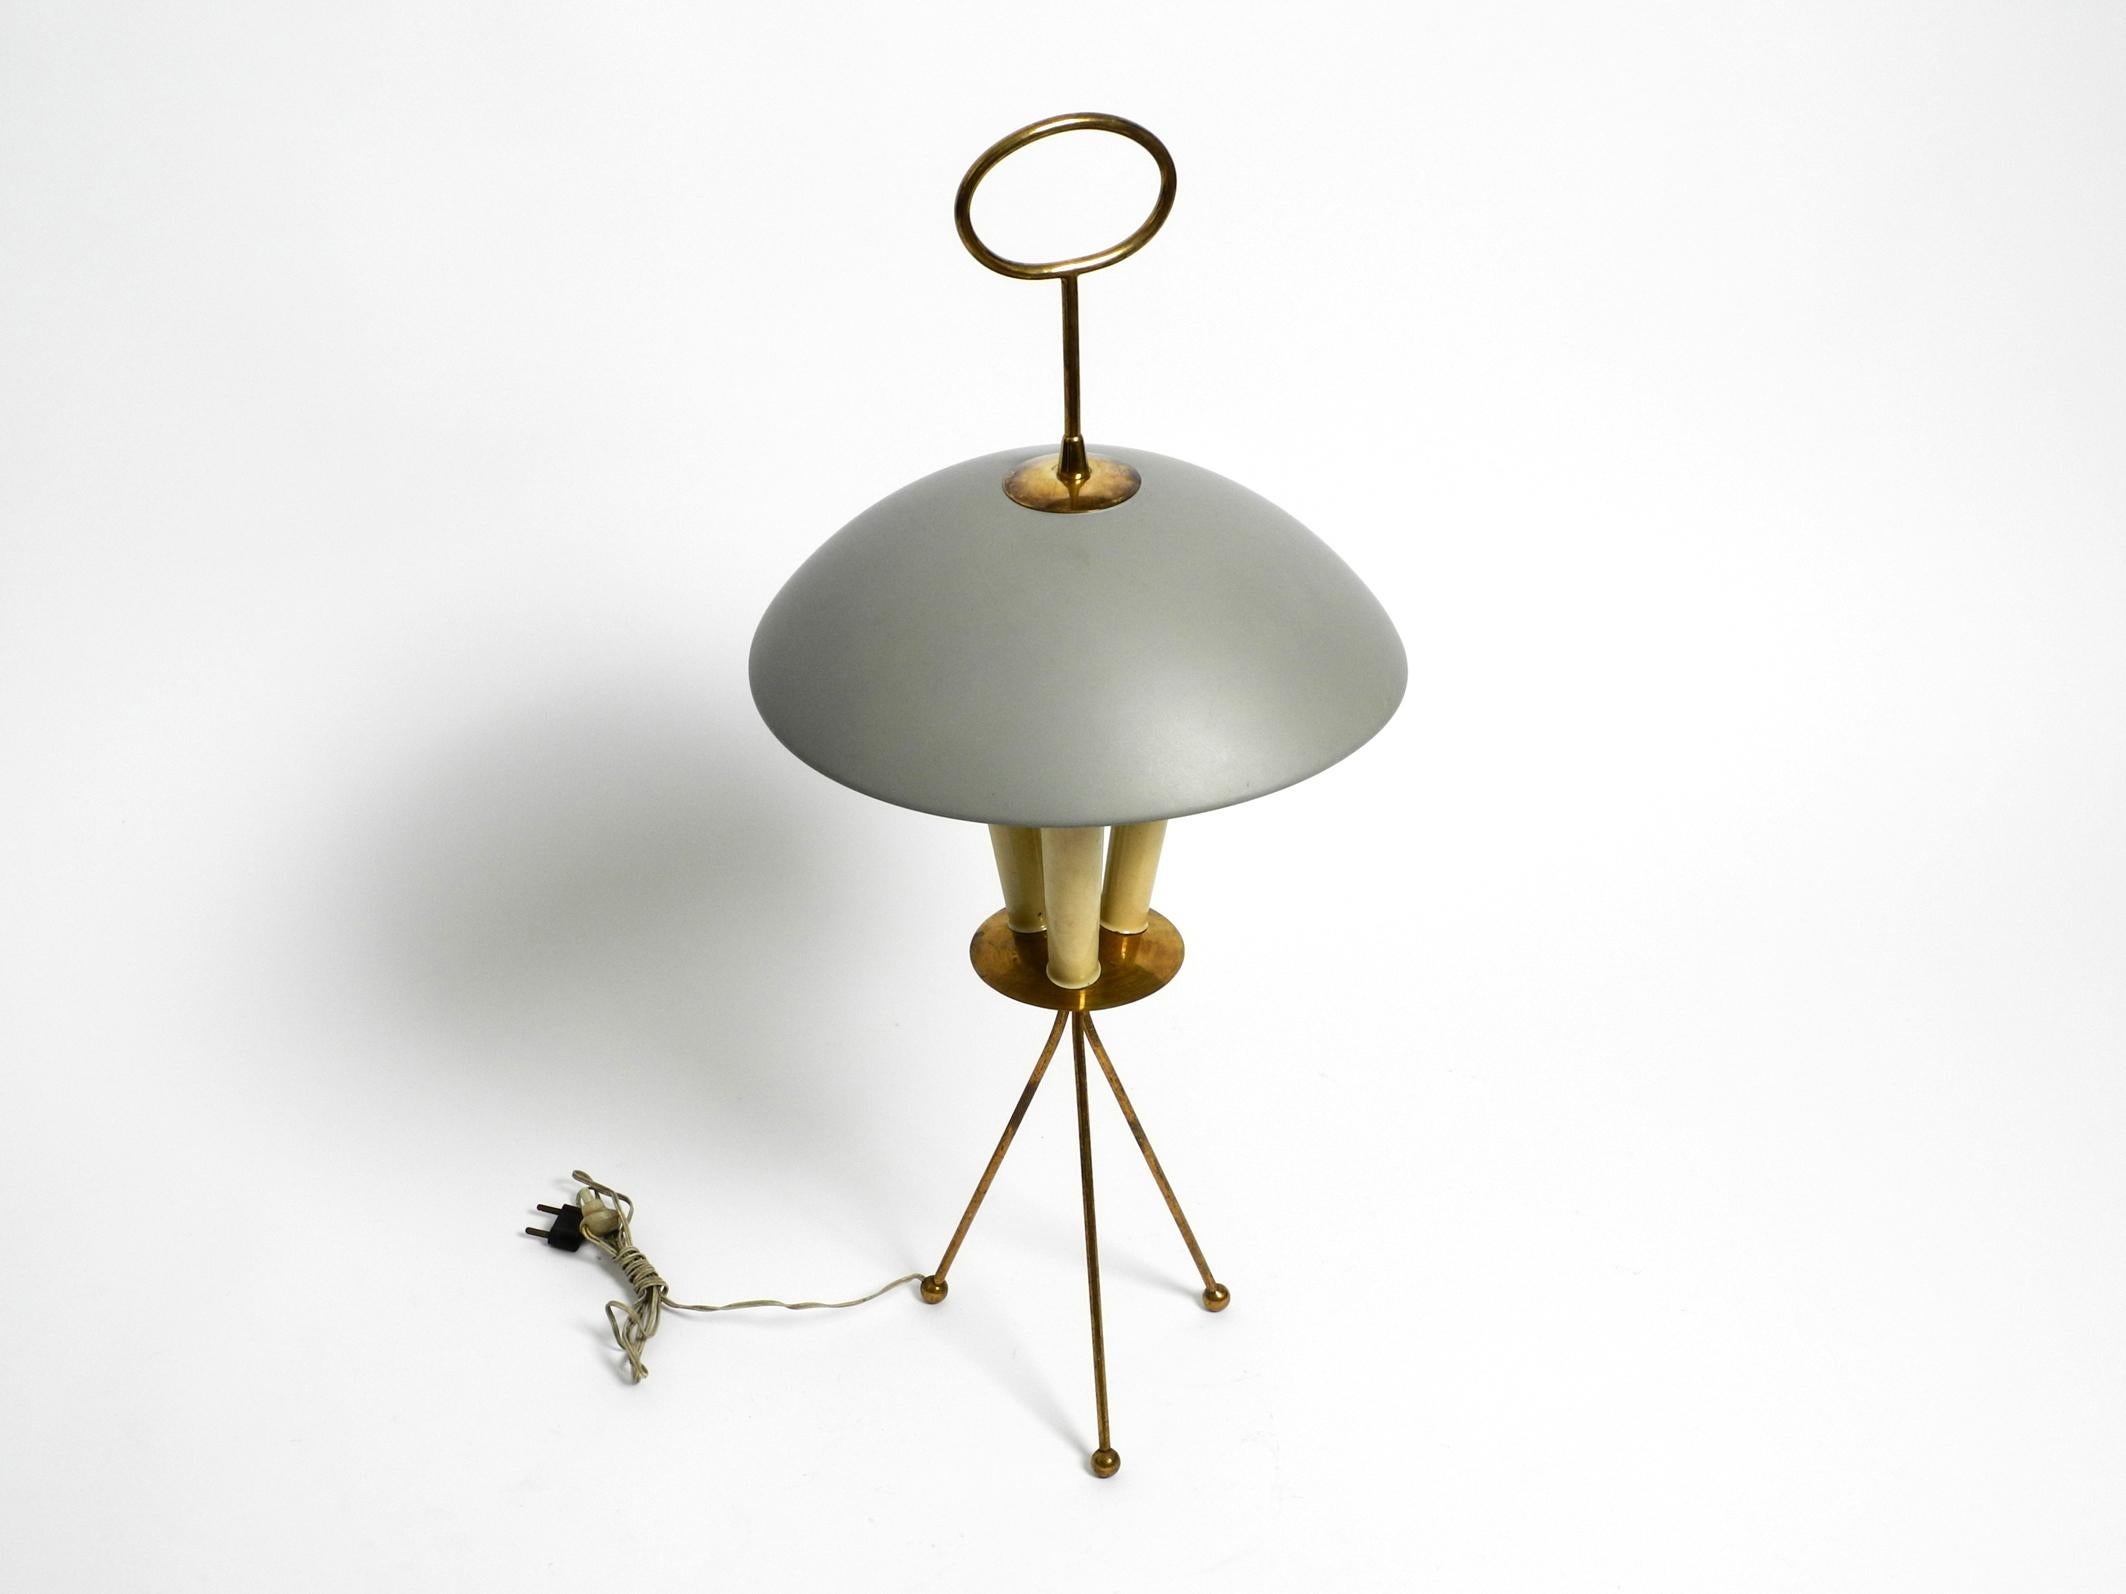 Beautiful very rare large Italian mid century tripod table lamp or floor lamp.
Frame and handle at the top are made of brass, the socket cones are made of plastic and the shade is made of metal.
Typical classic mid century design from Italy in